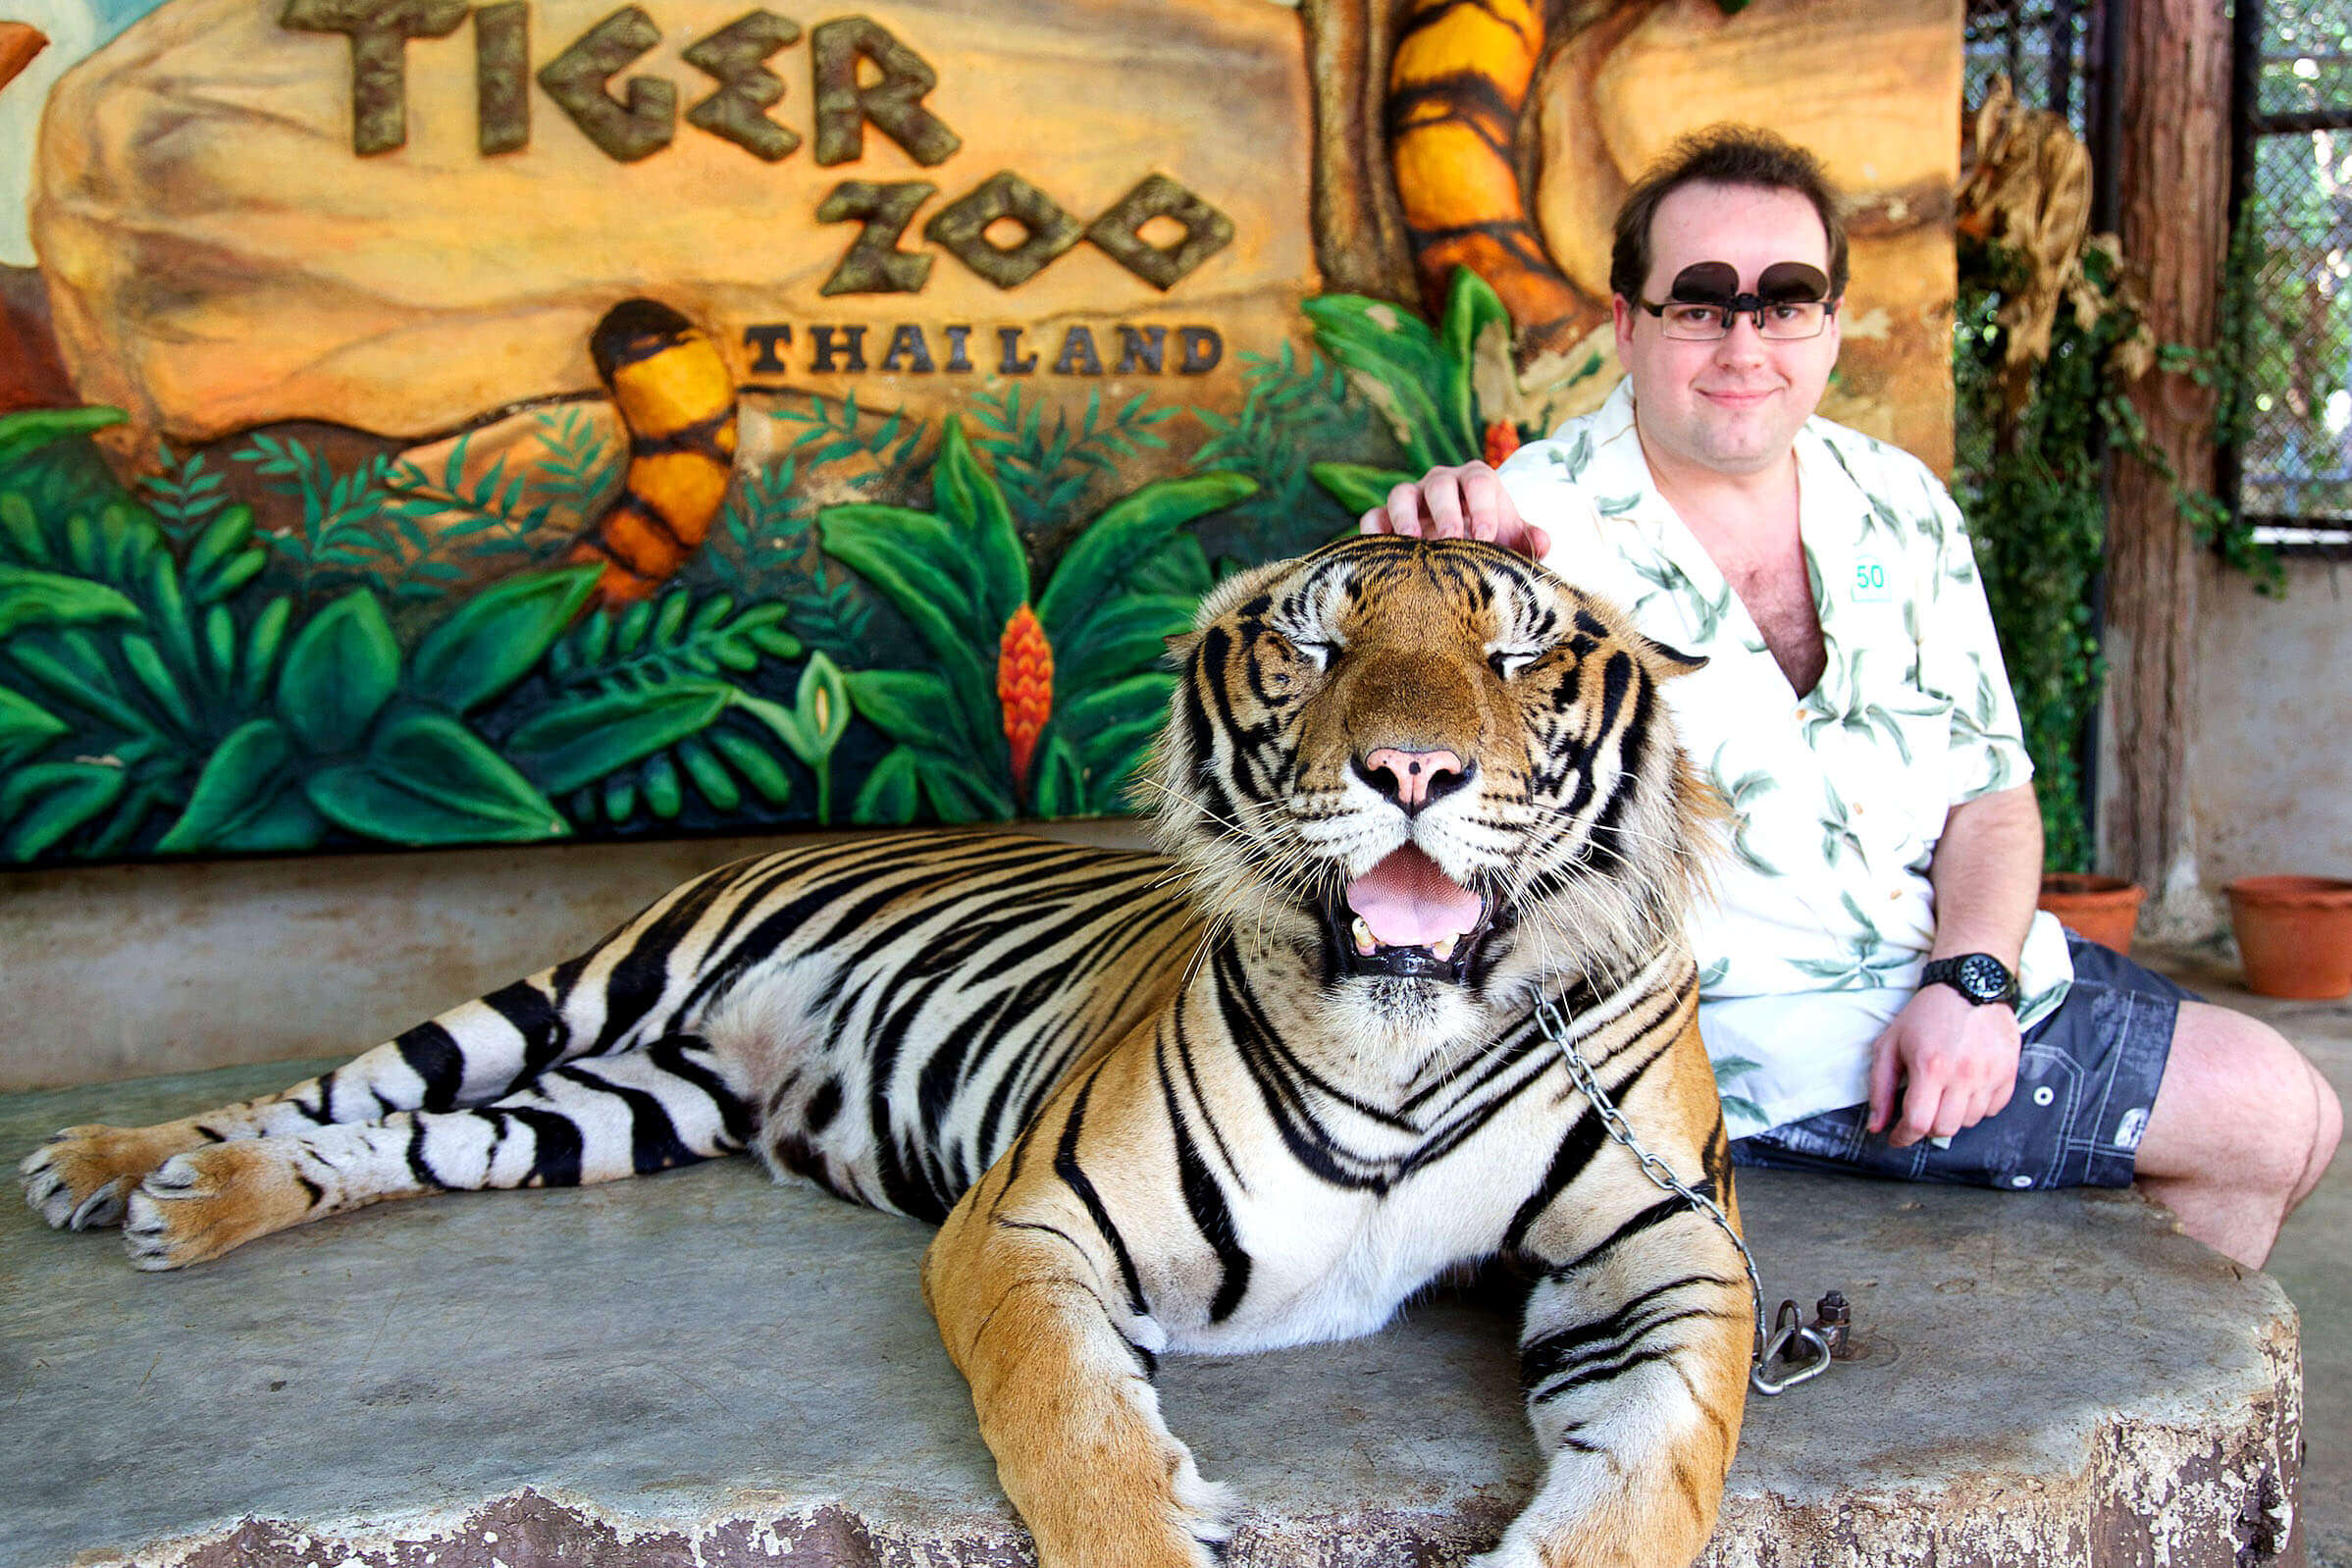 Tourists can see the tiger